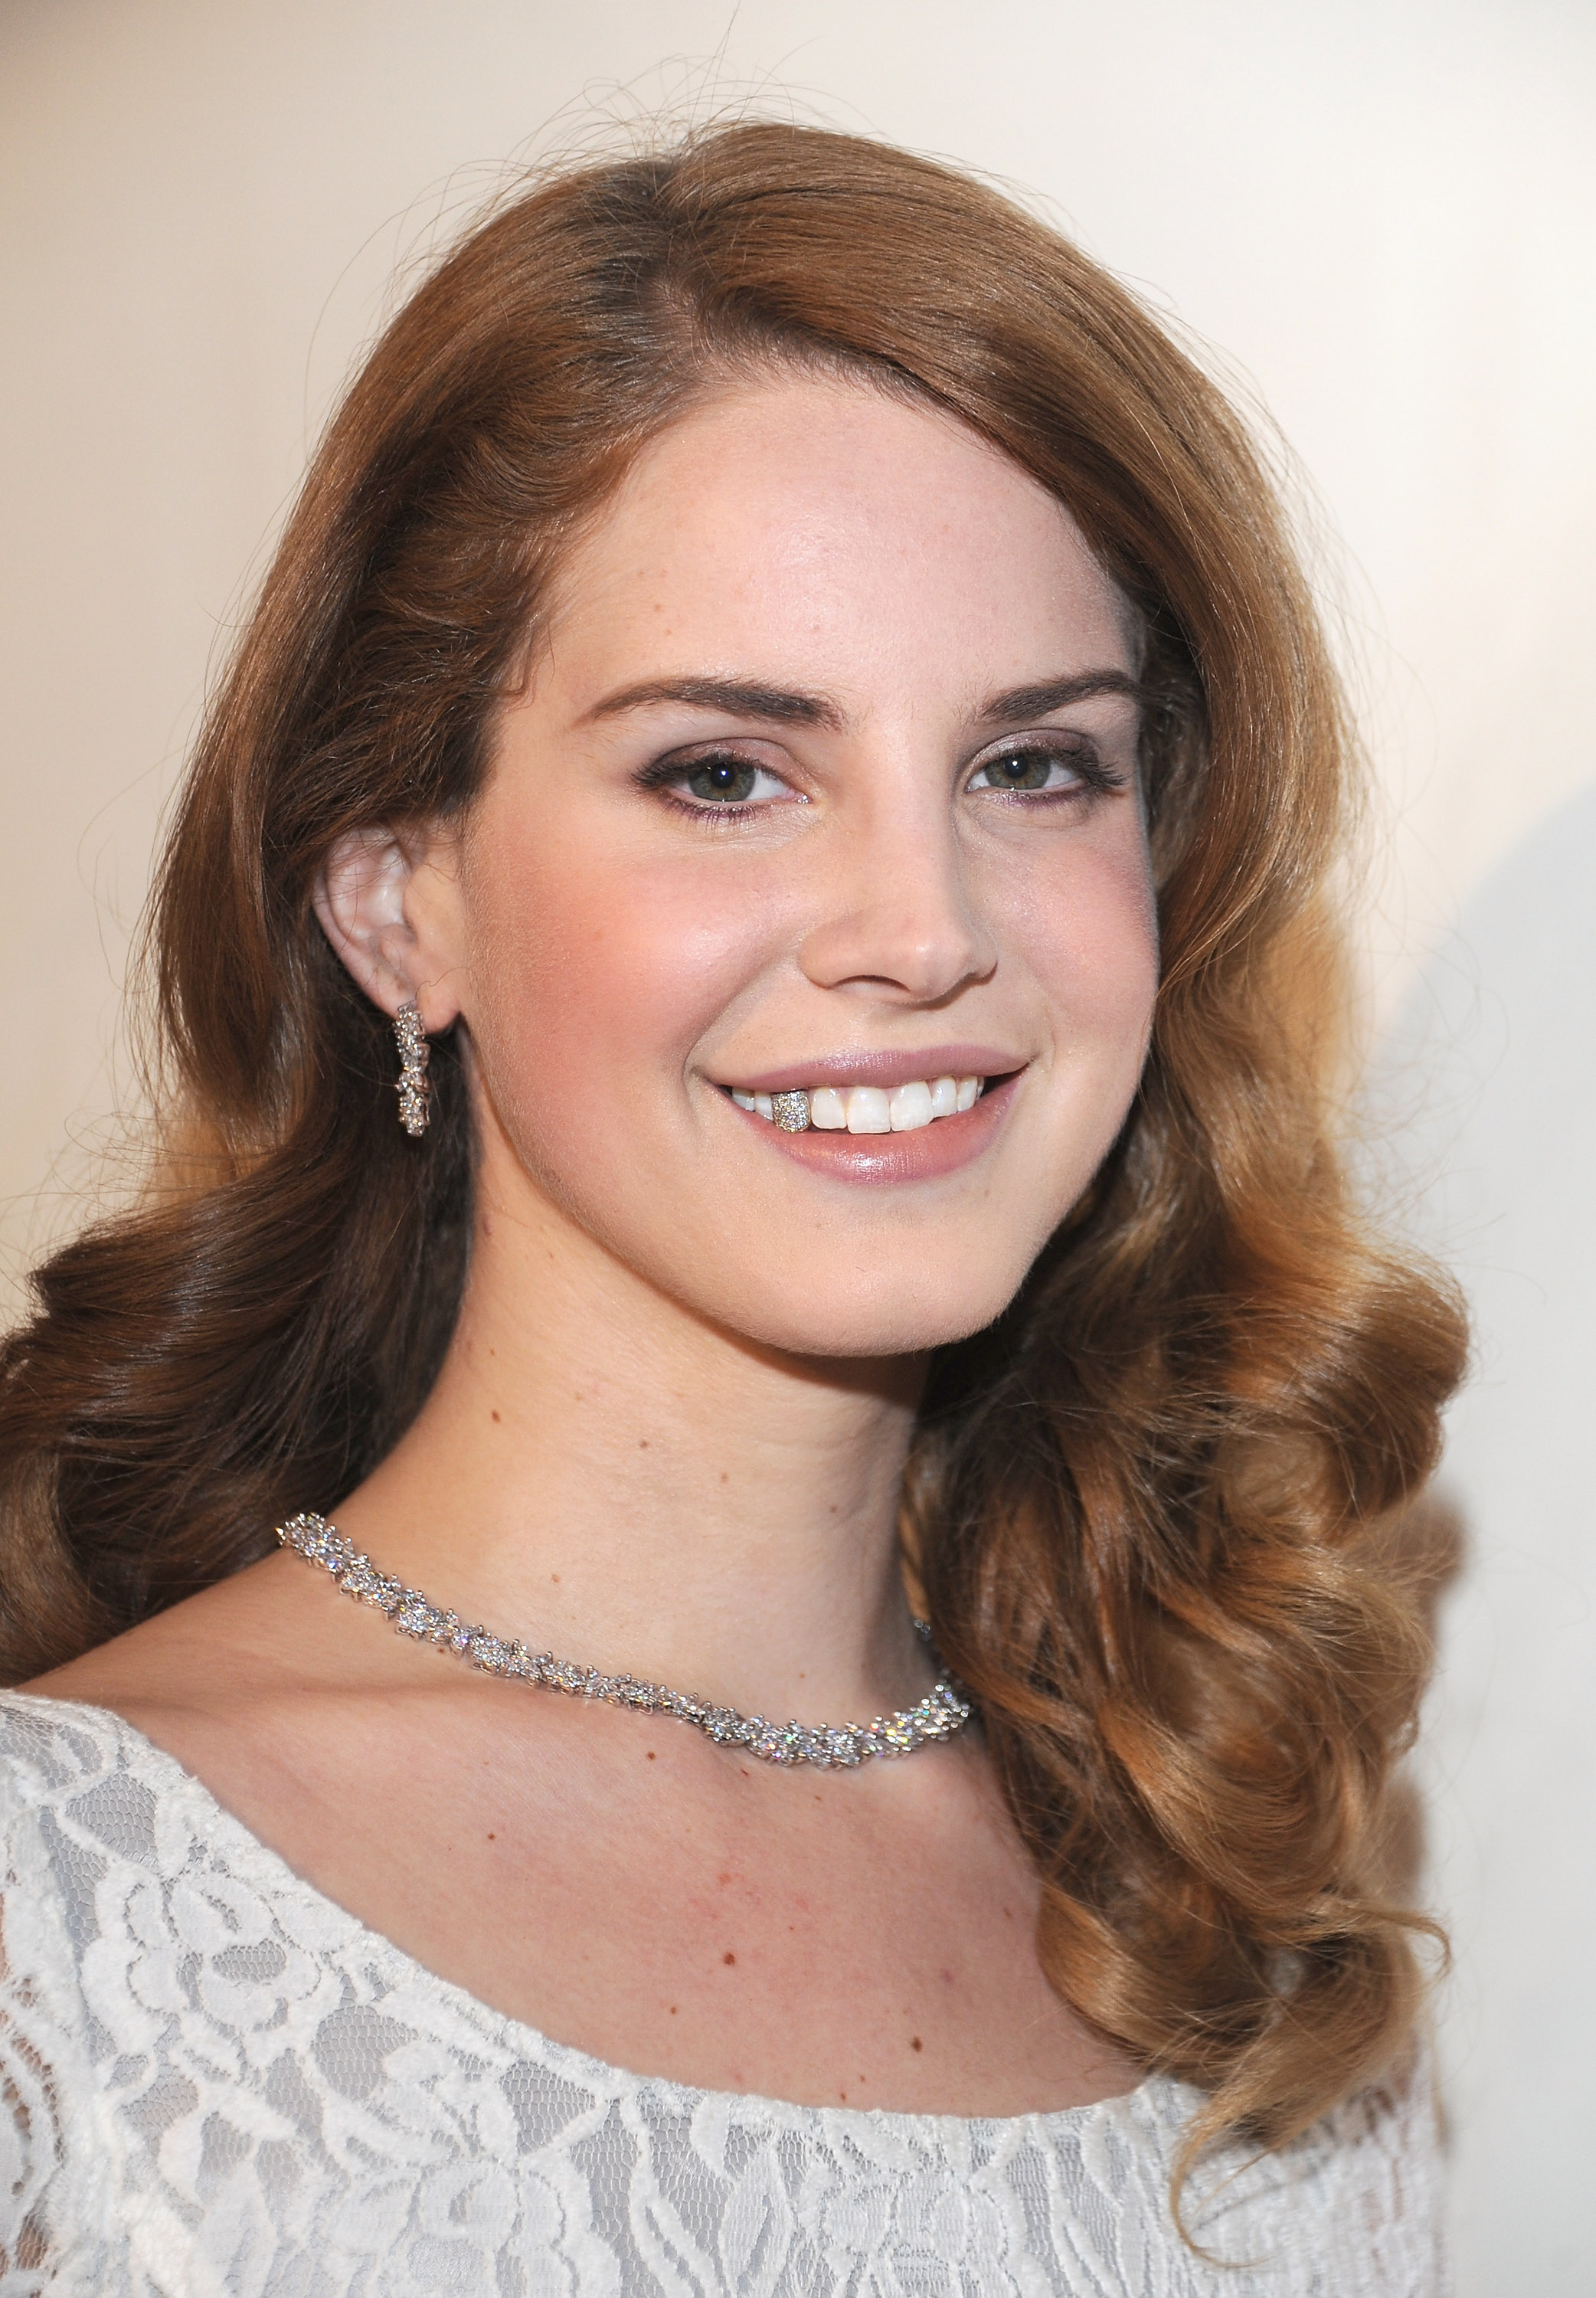 2012 Lana Del Rey smiling at an event; she wears diamond jewellery and matching grillz one one tooth